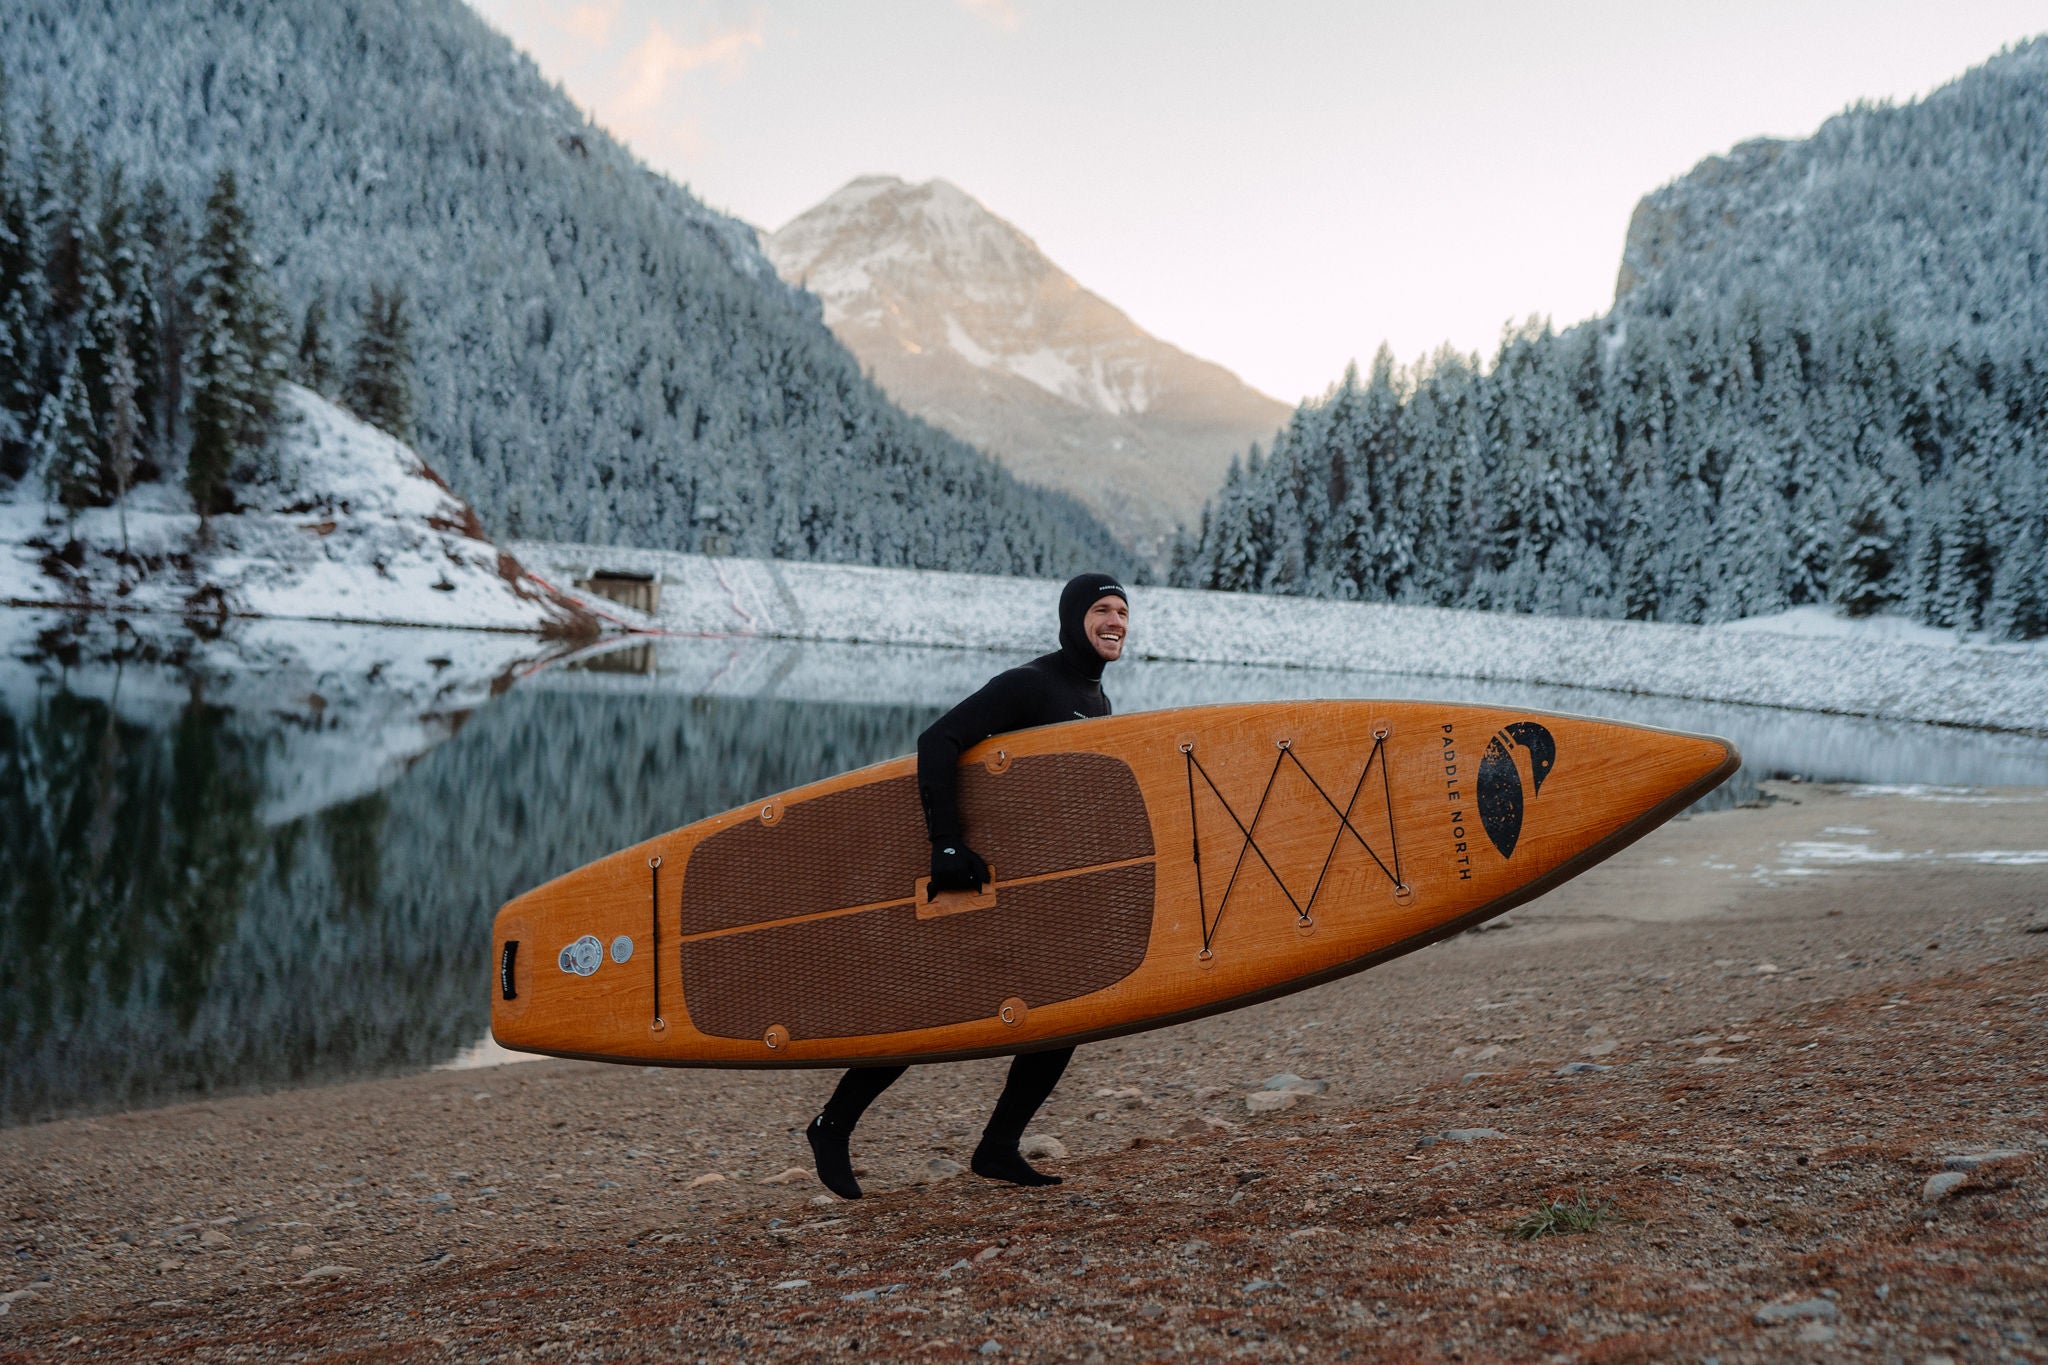 How to Store your Inflatable Paddle Board, Utility Dock, or Kayak During the Winter